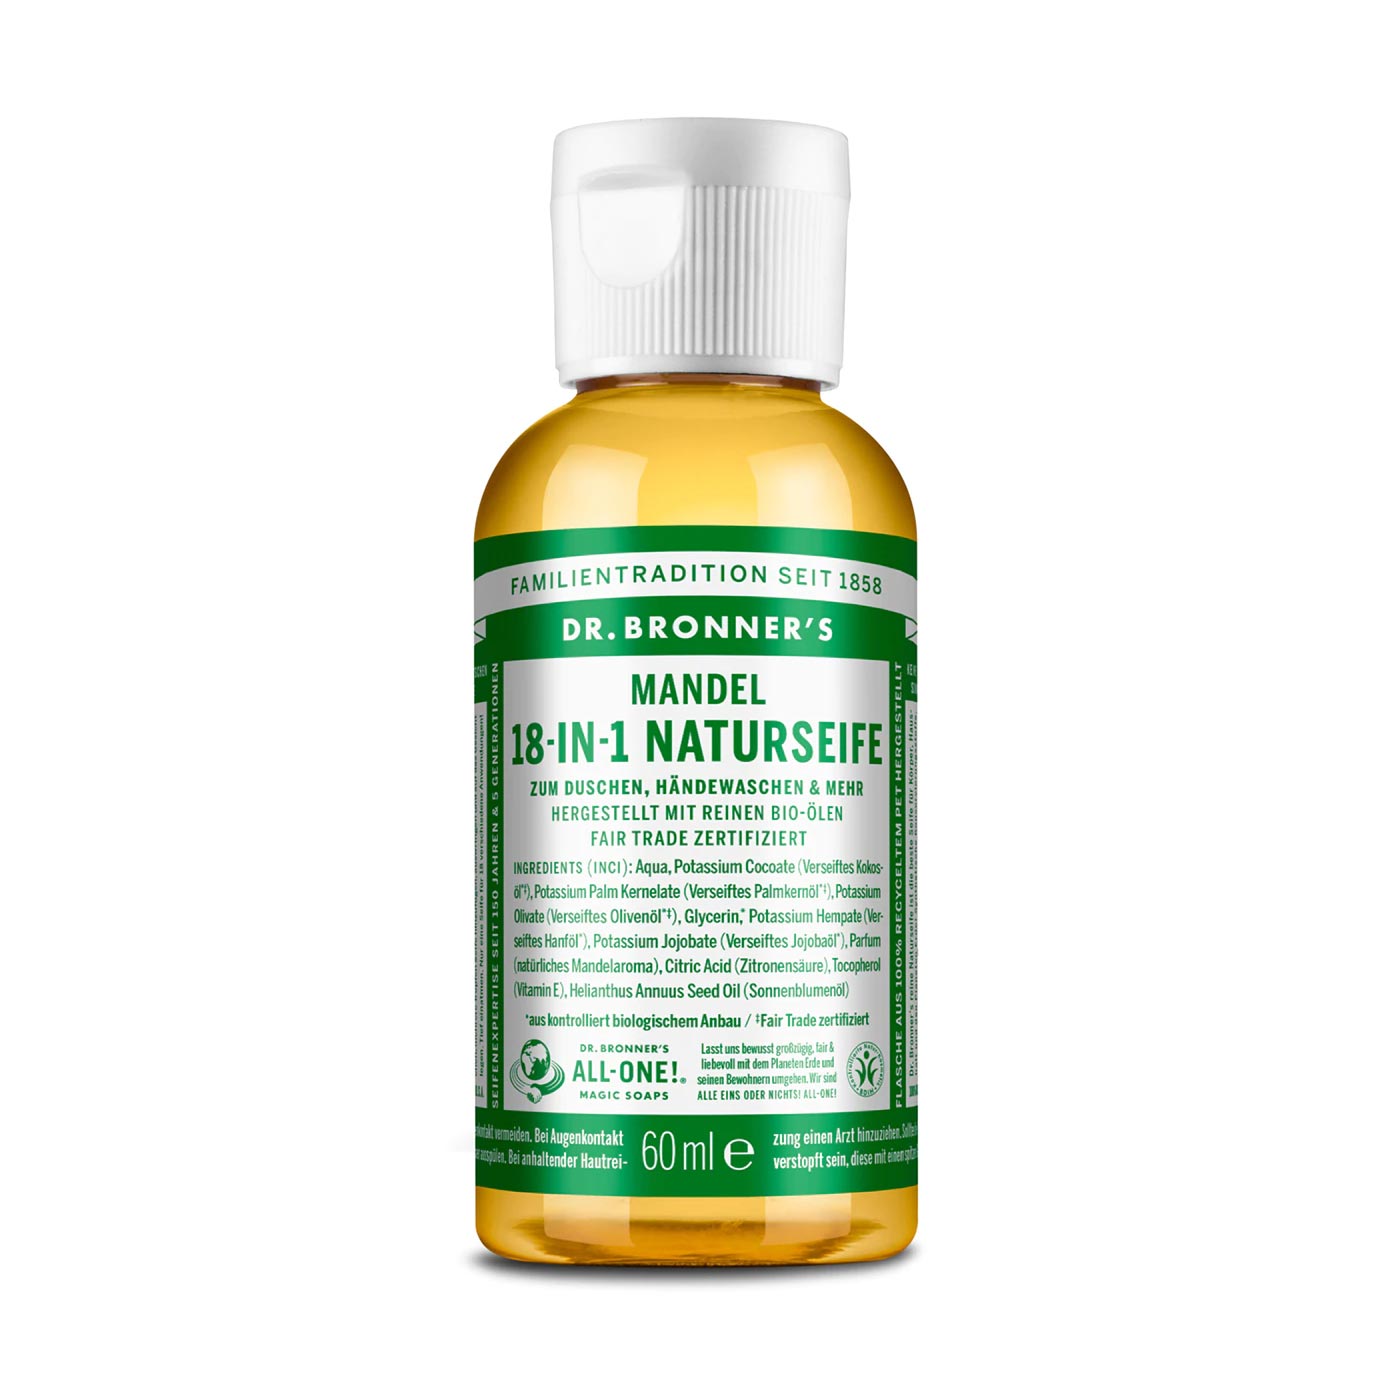 Dr. Bronner's 18-IN-1 Natural Soap (60ml)